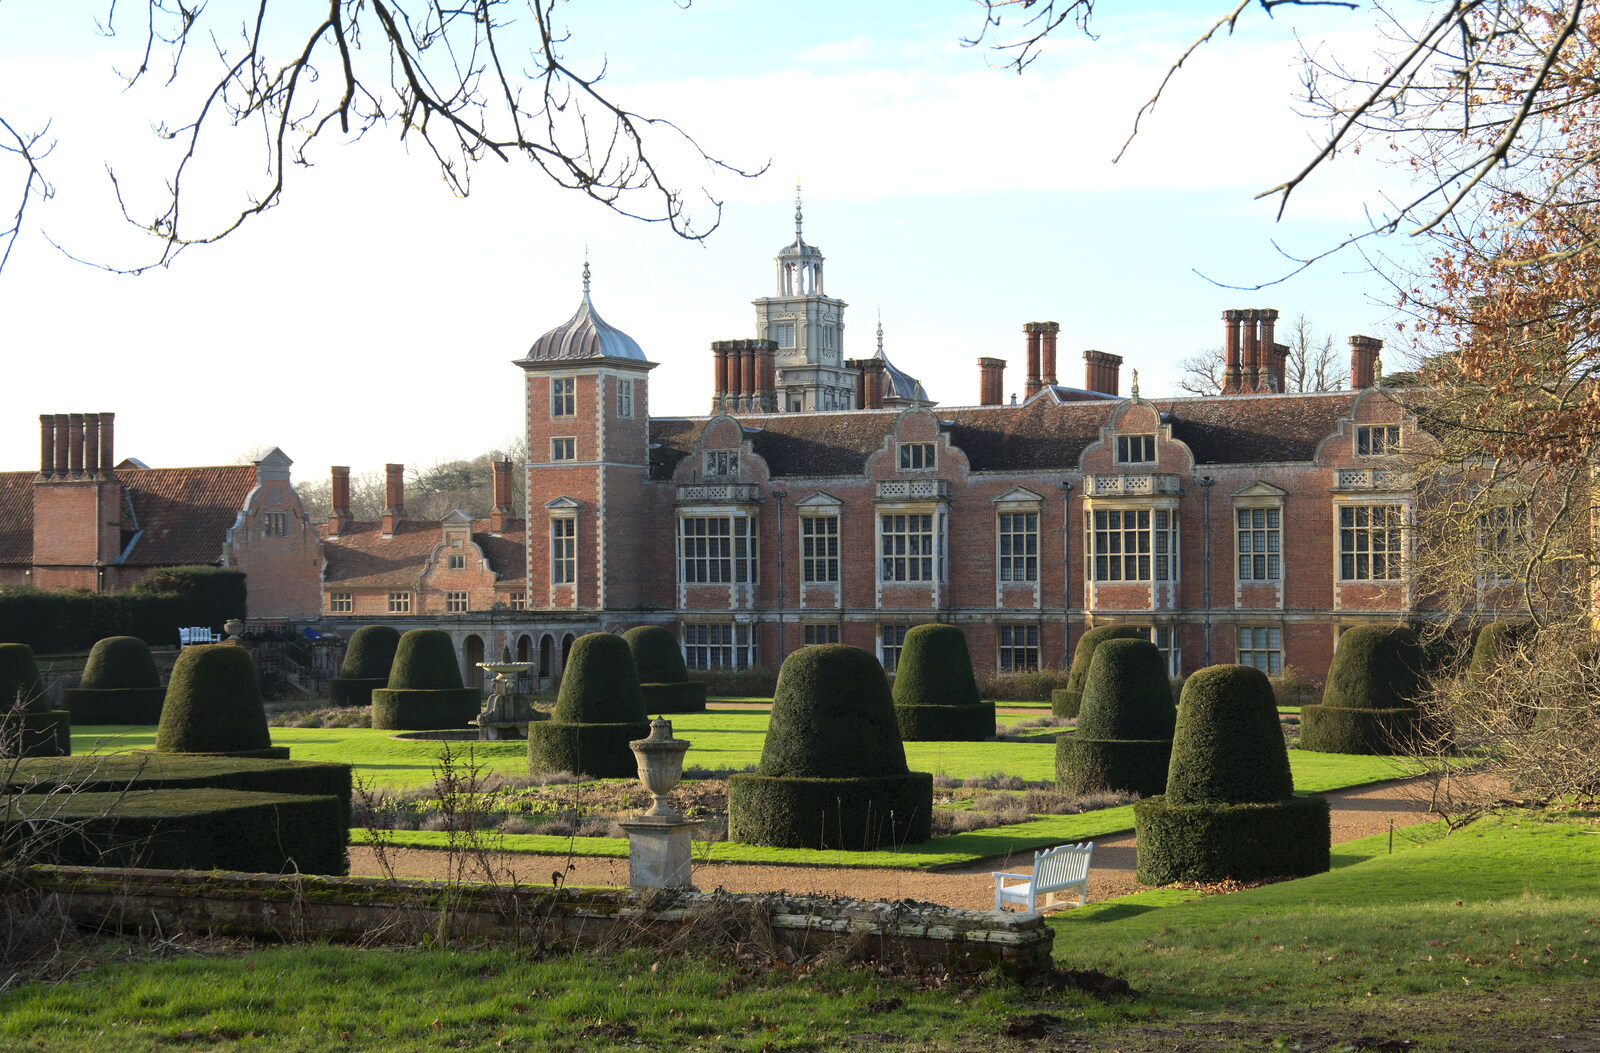 Another view of Blickling Hall from A Visit to Blickling Hall, Aylsham, Norfolk - 9th January 2022